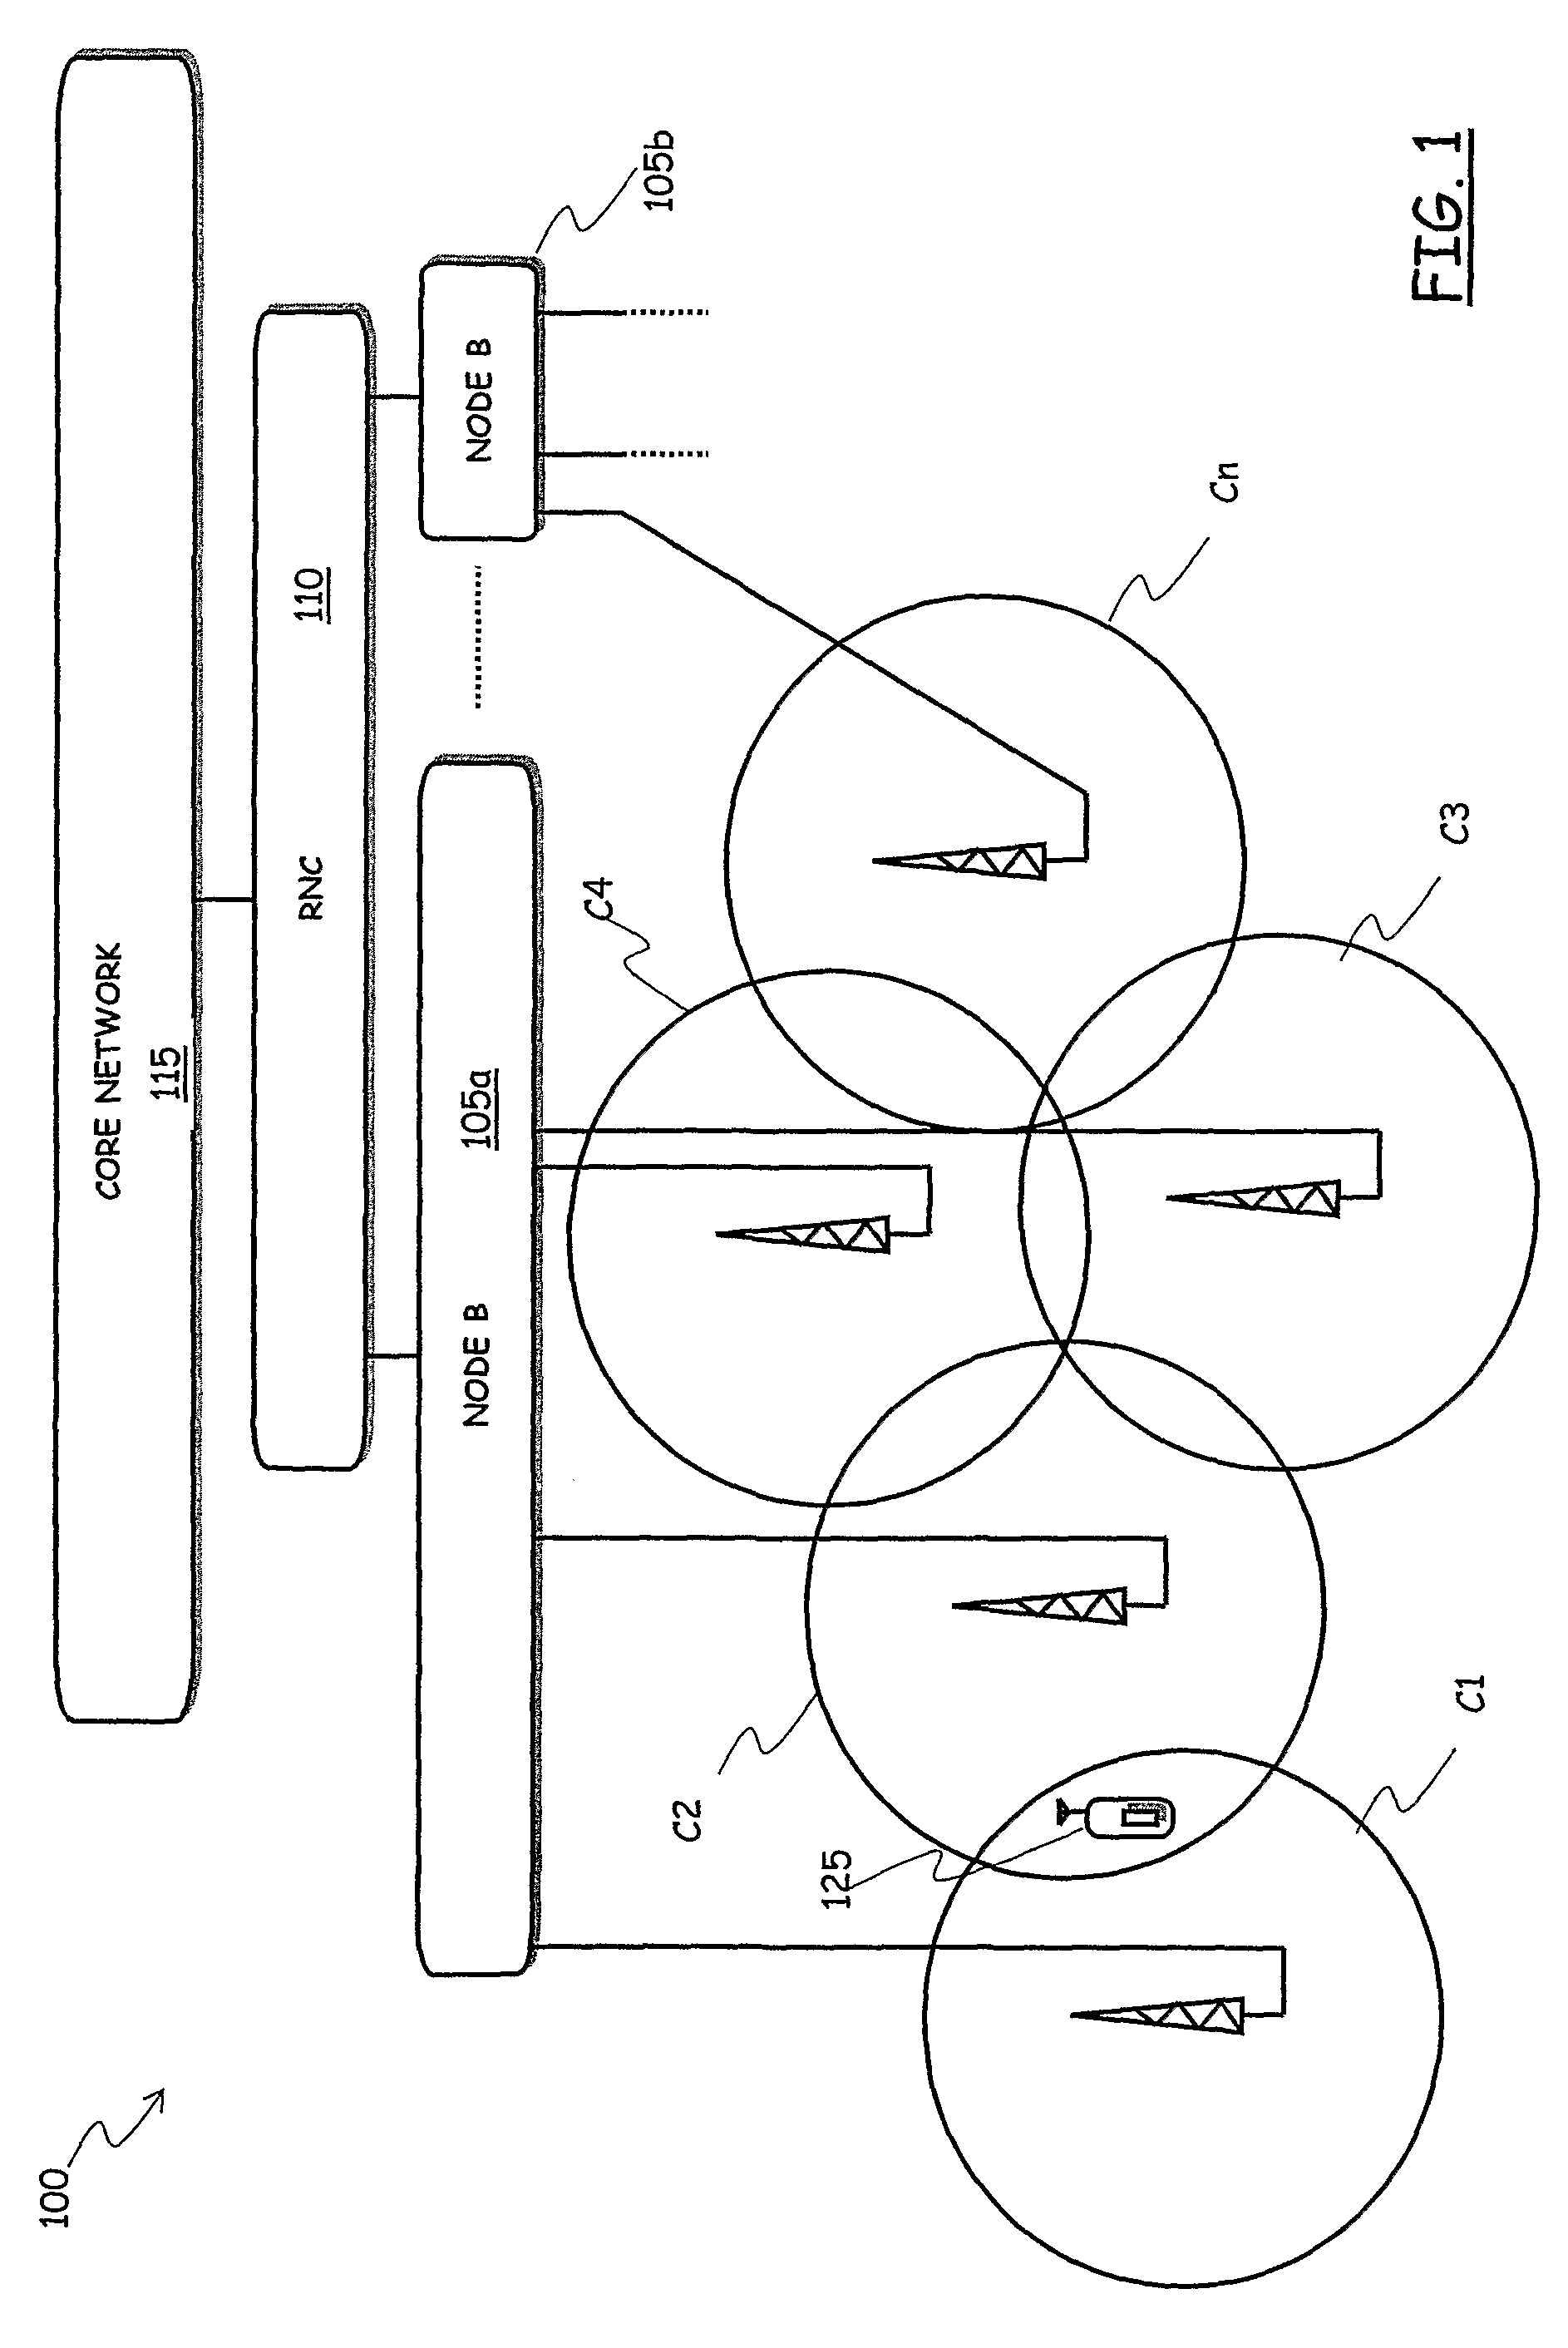 Method for planning a cellular mobile telecommunications network